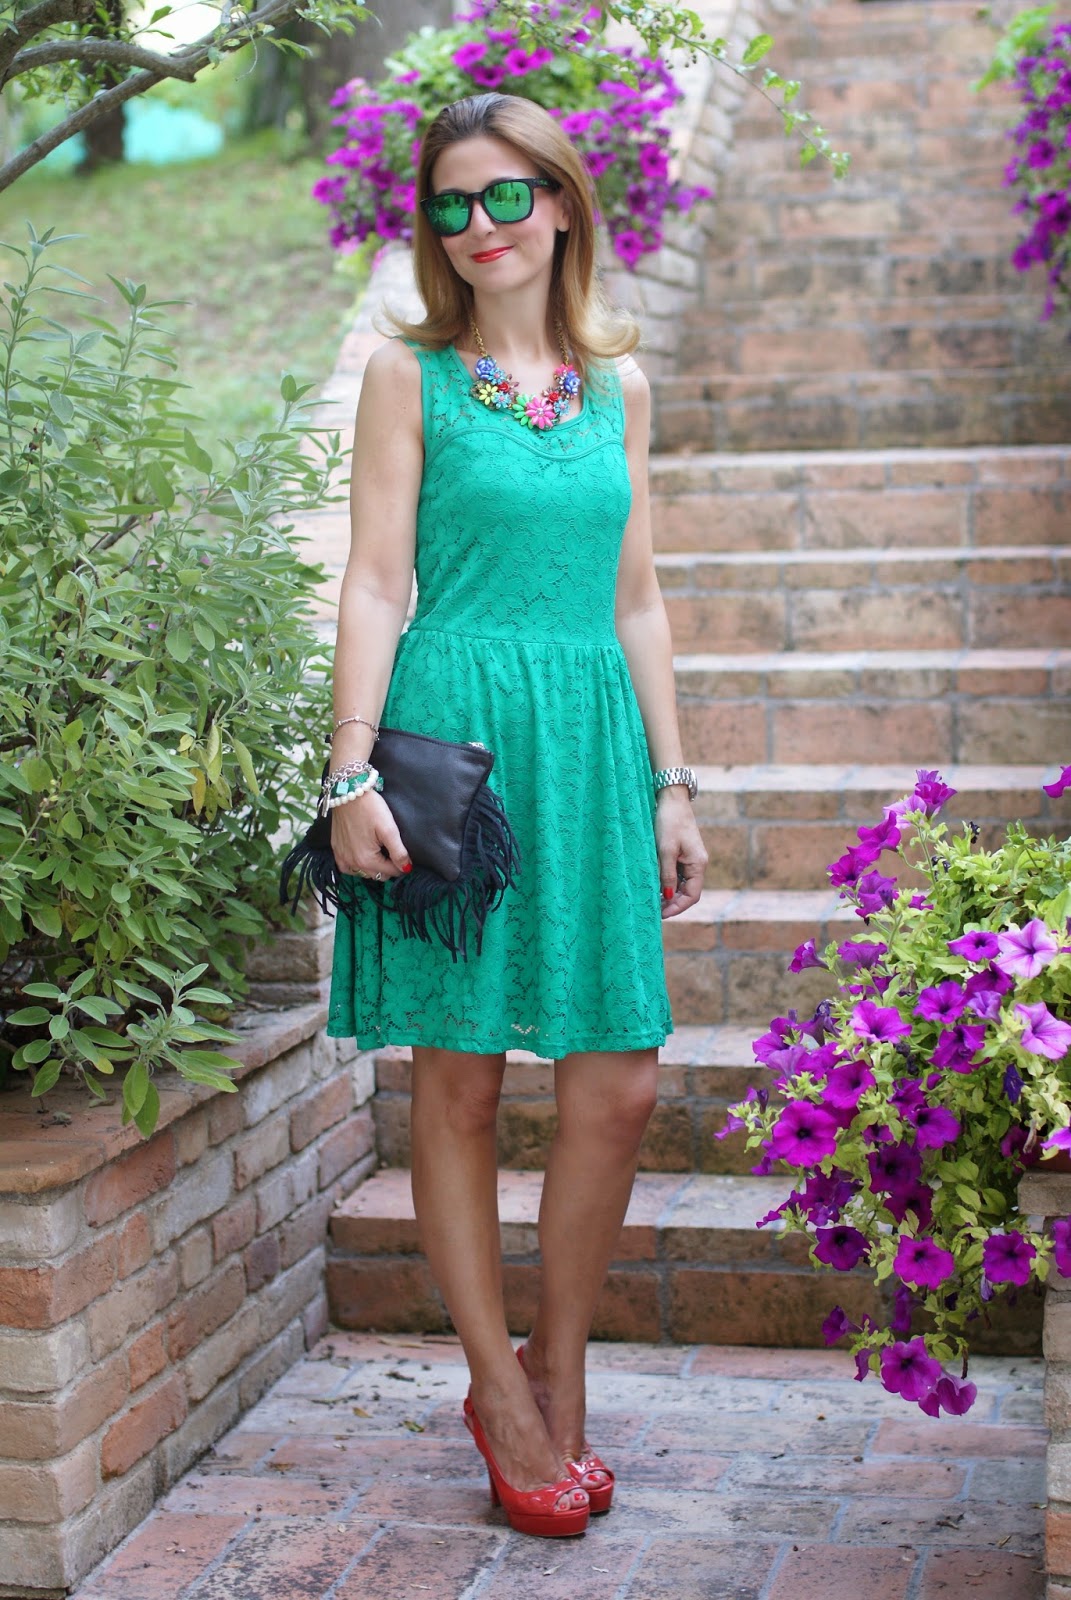 Green lace, tropical hat | Fashion and Cookies - fashion and beauty blog